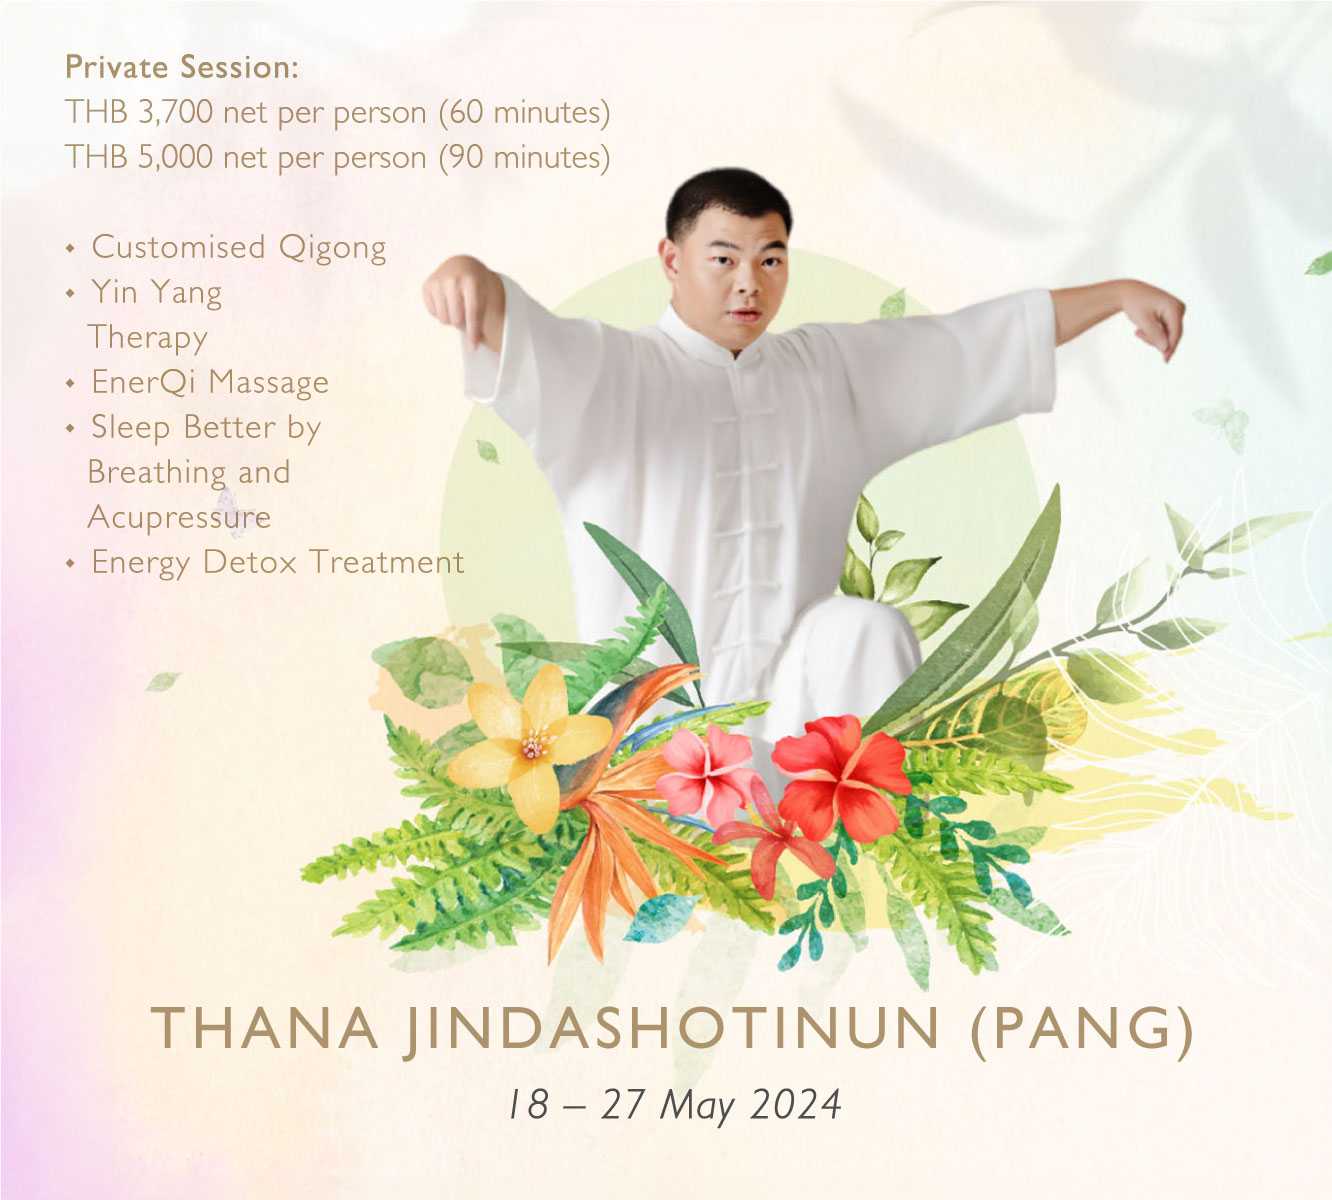 May Practitioner: Harmony Healer by Qigong Master (Private Session) - 90 minutes